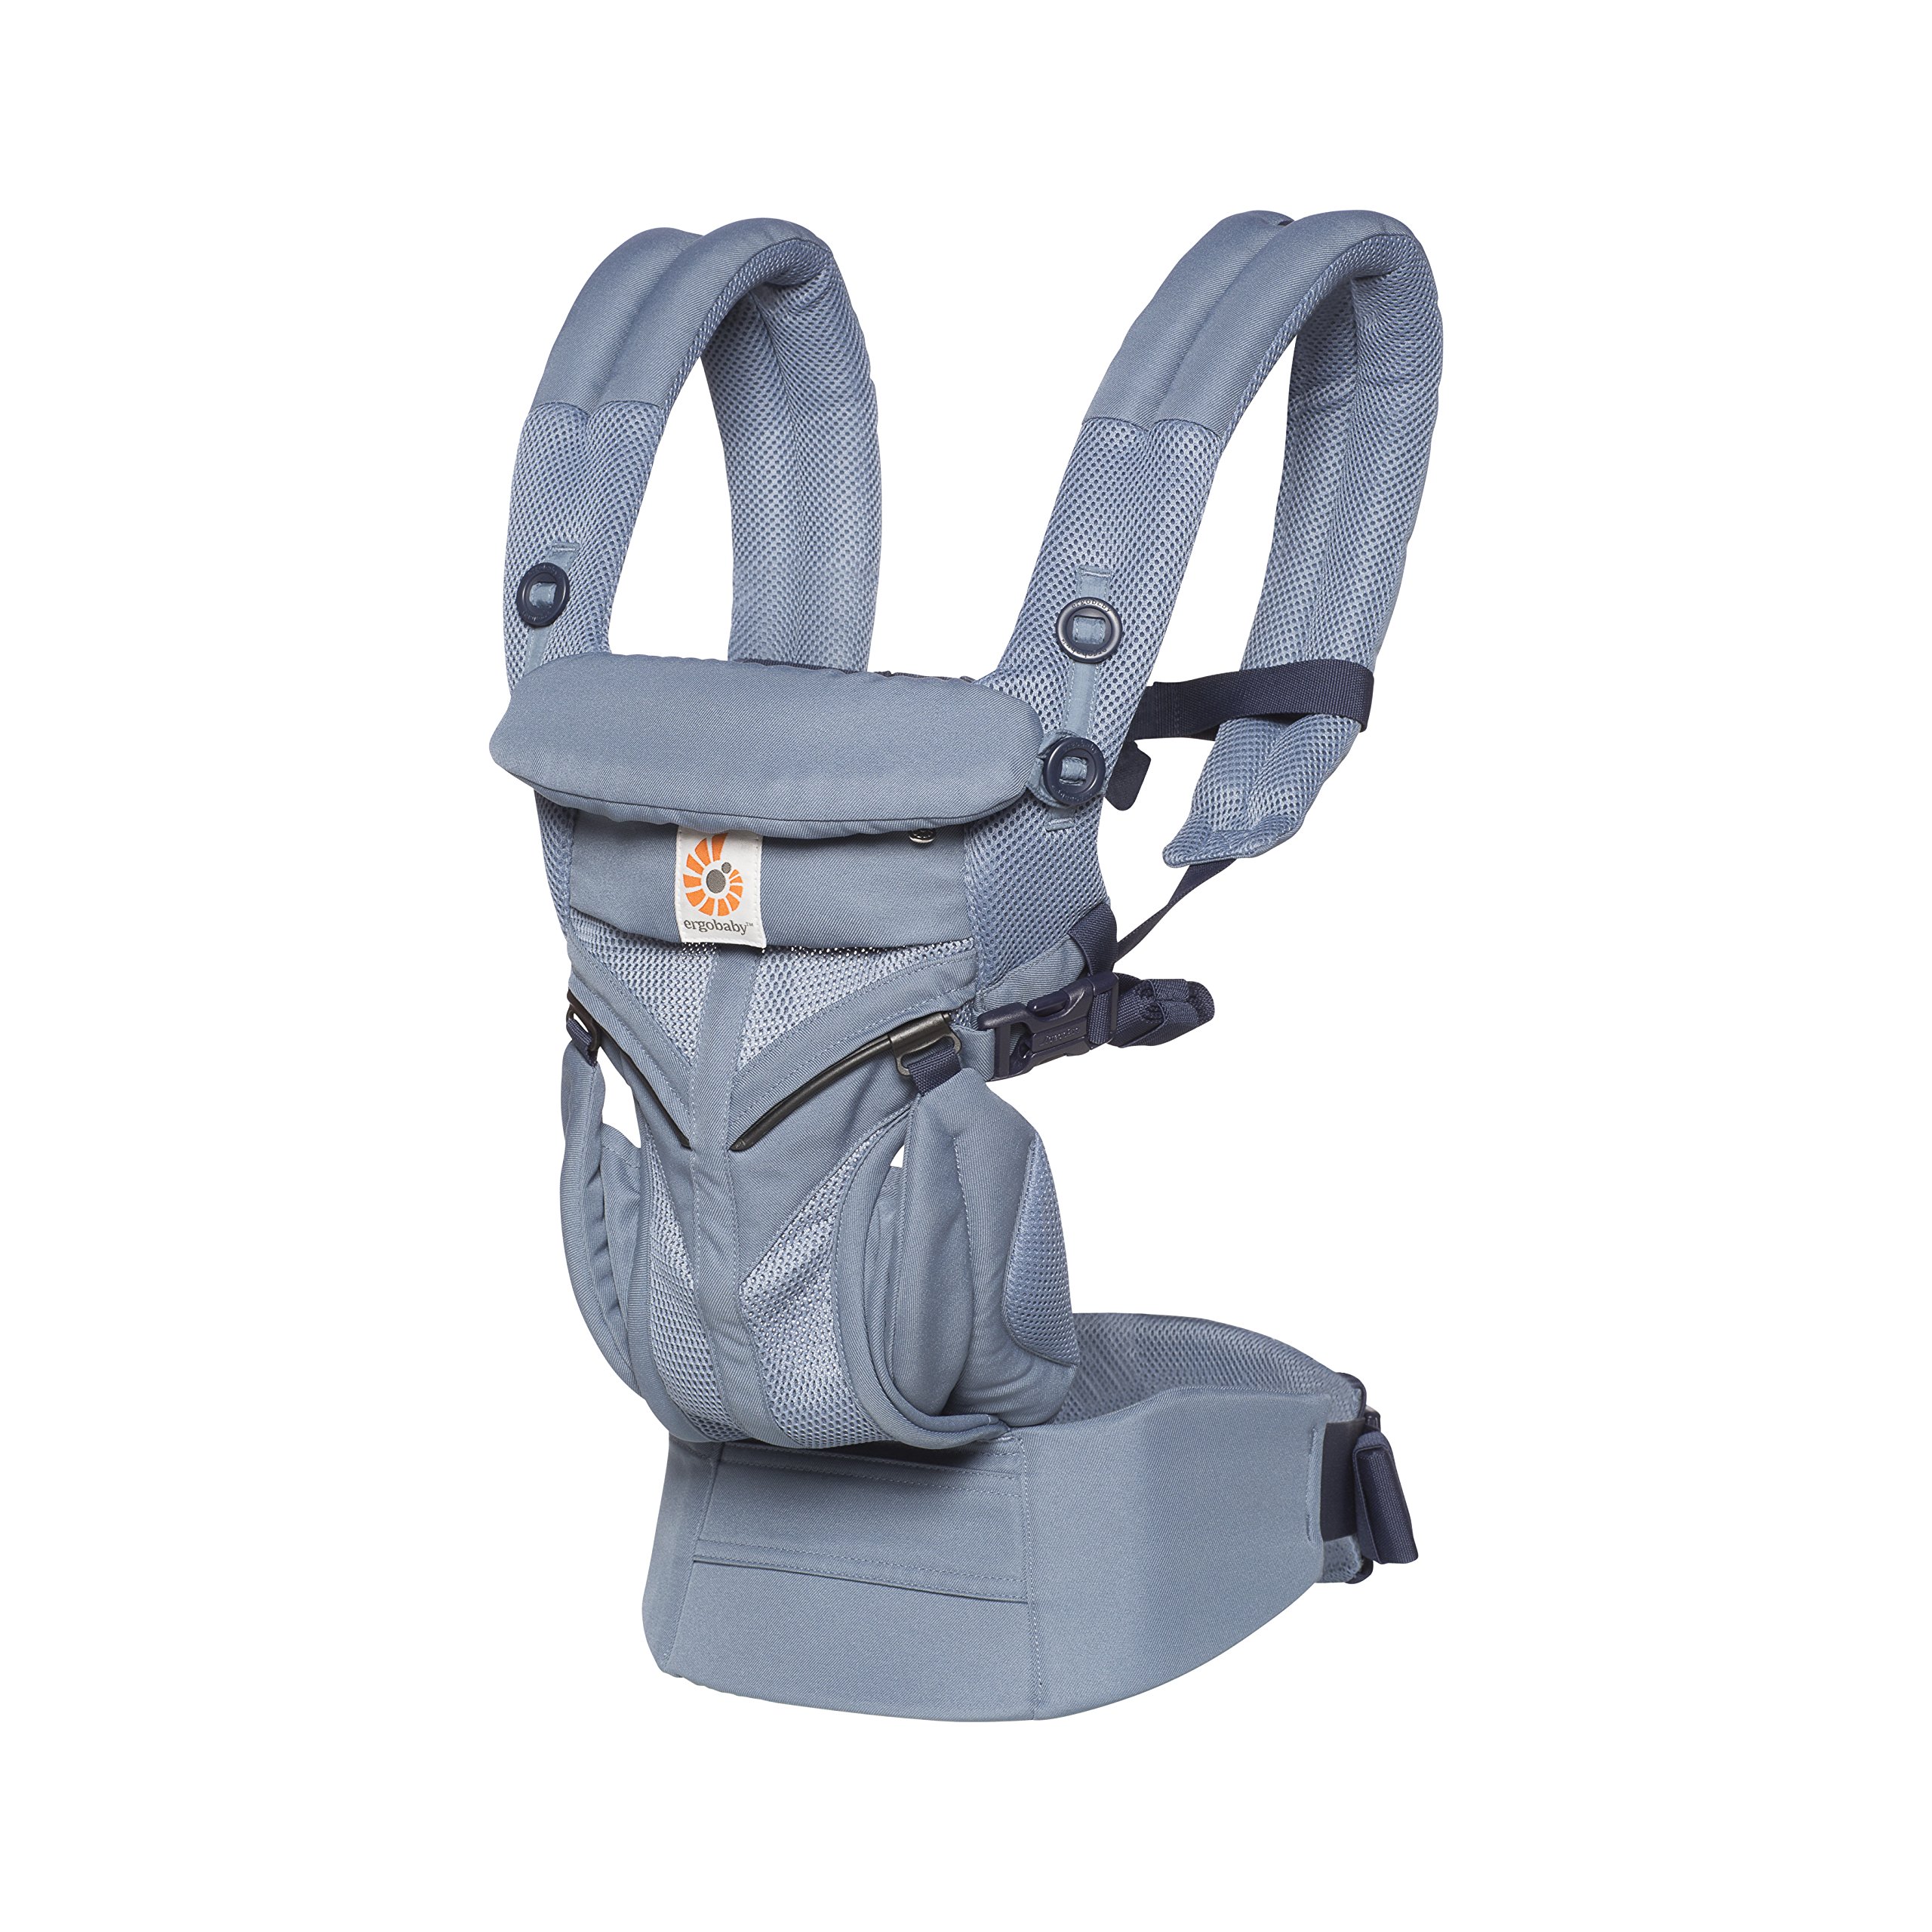 Ergobaby Omni 360 All-Position Baby Carrier for Newborn to Toddler with Lumbar Support & Cool Air Mesh (7-45 Lb), Oxford Blue